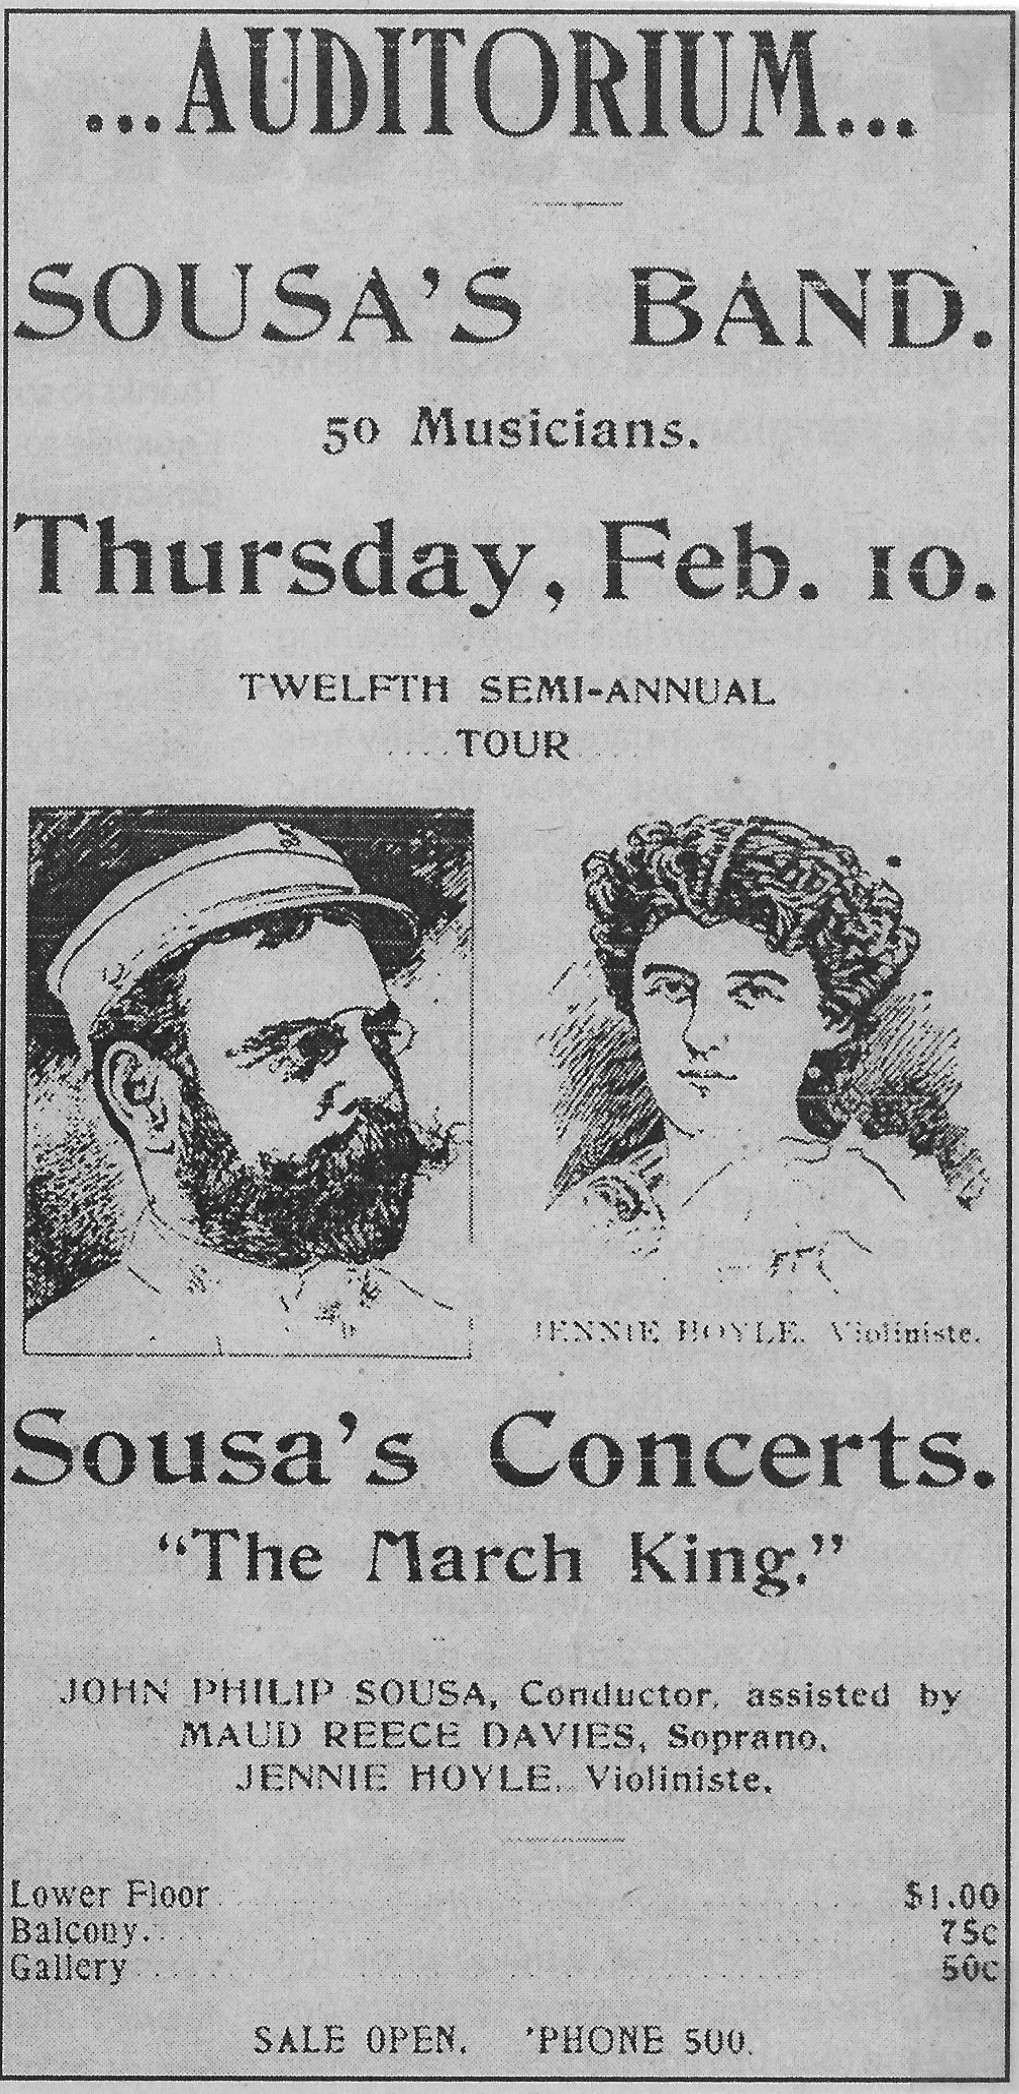 Sousa's Band Concert, February 10, 1898, Galesburg, IL